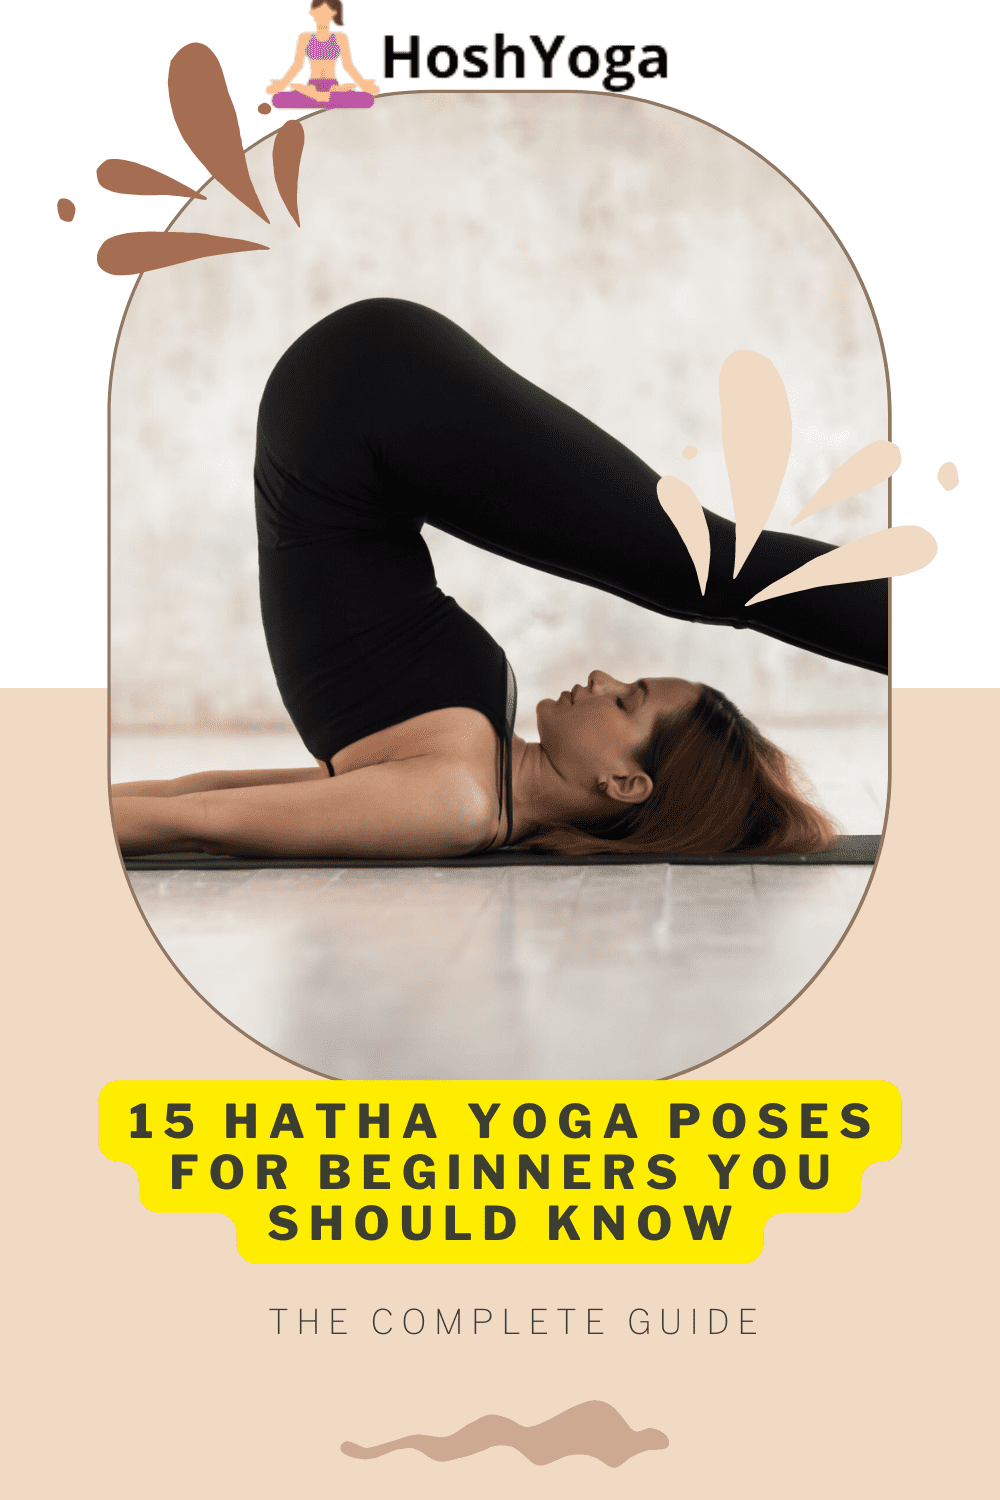 15 Hatha Yoga Poses for Beginners You Should Know - Hosh Yoga